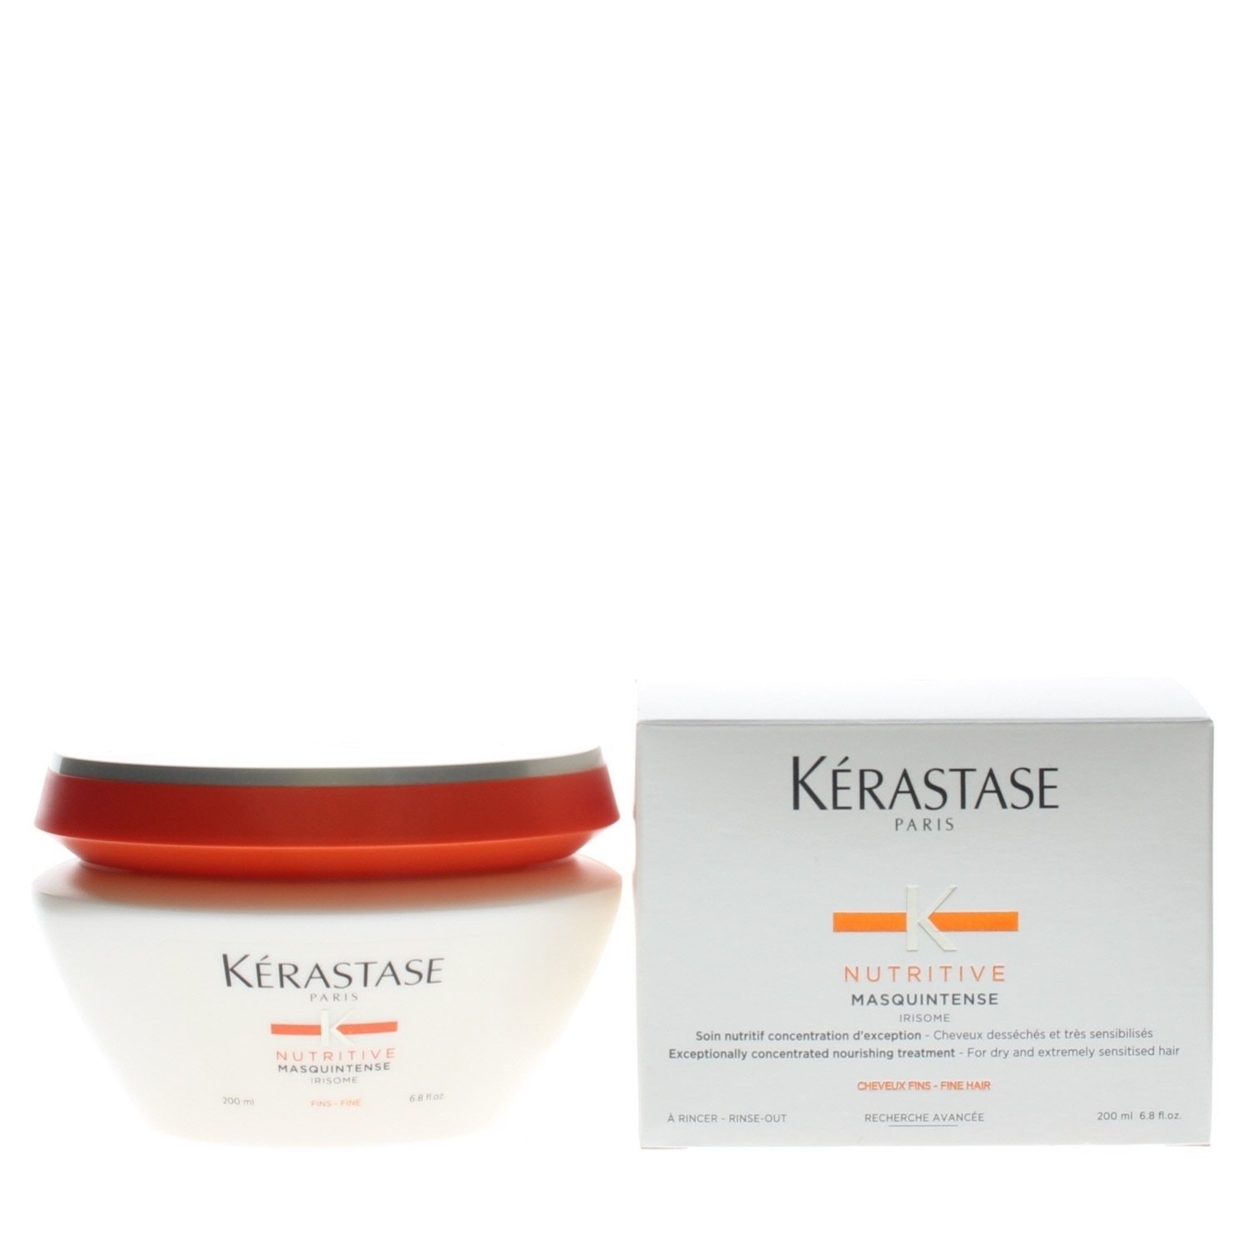 Kerastase Nutritive Masquintense Irisome Exceptionally Concentrated Nourishing Treatment - Fine Hair 6.8oz/200ml